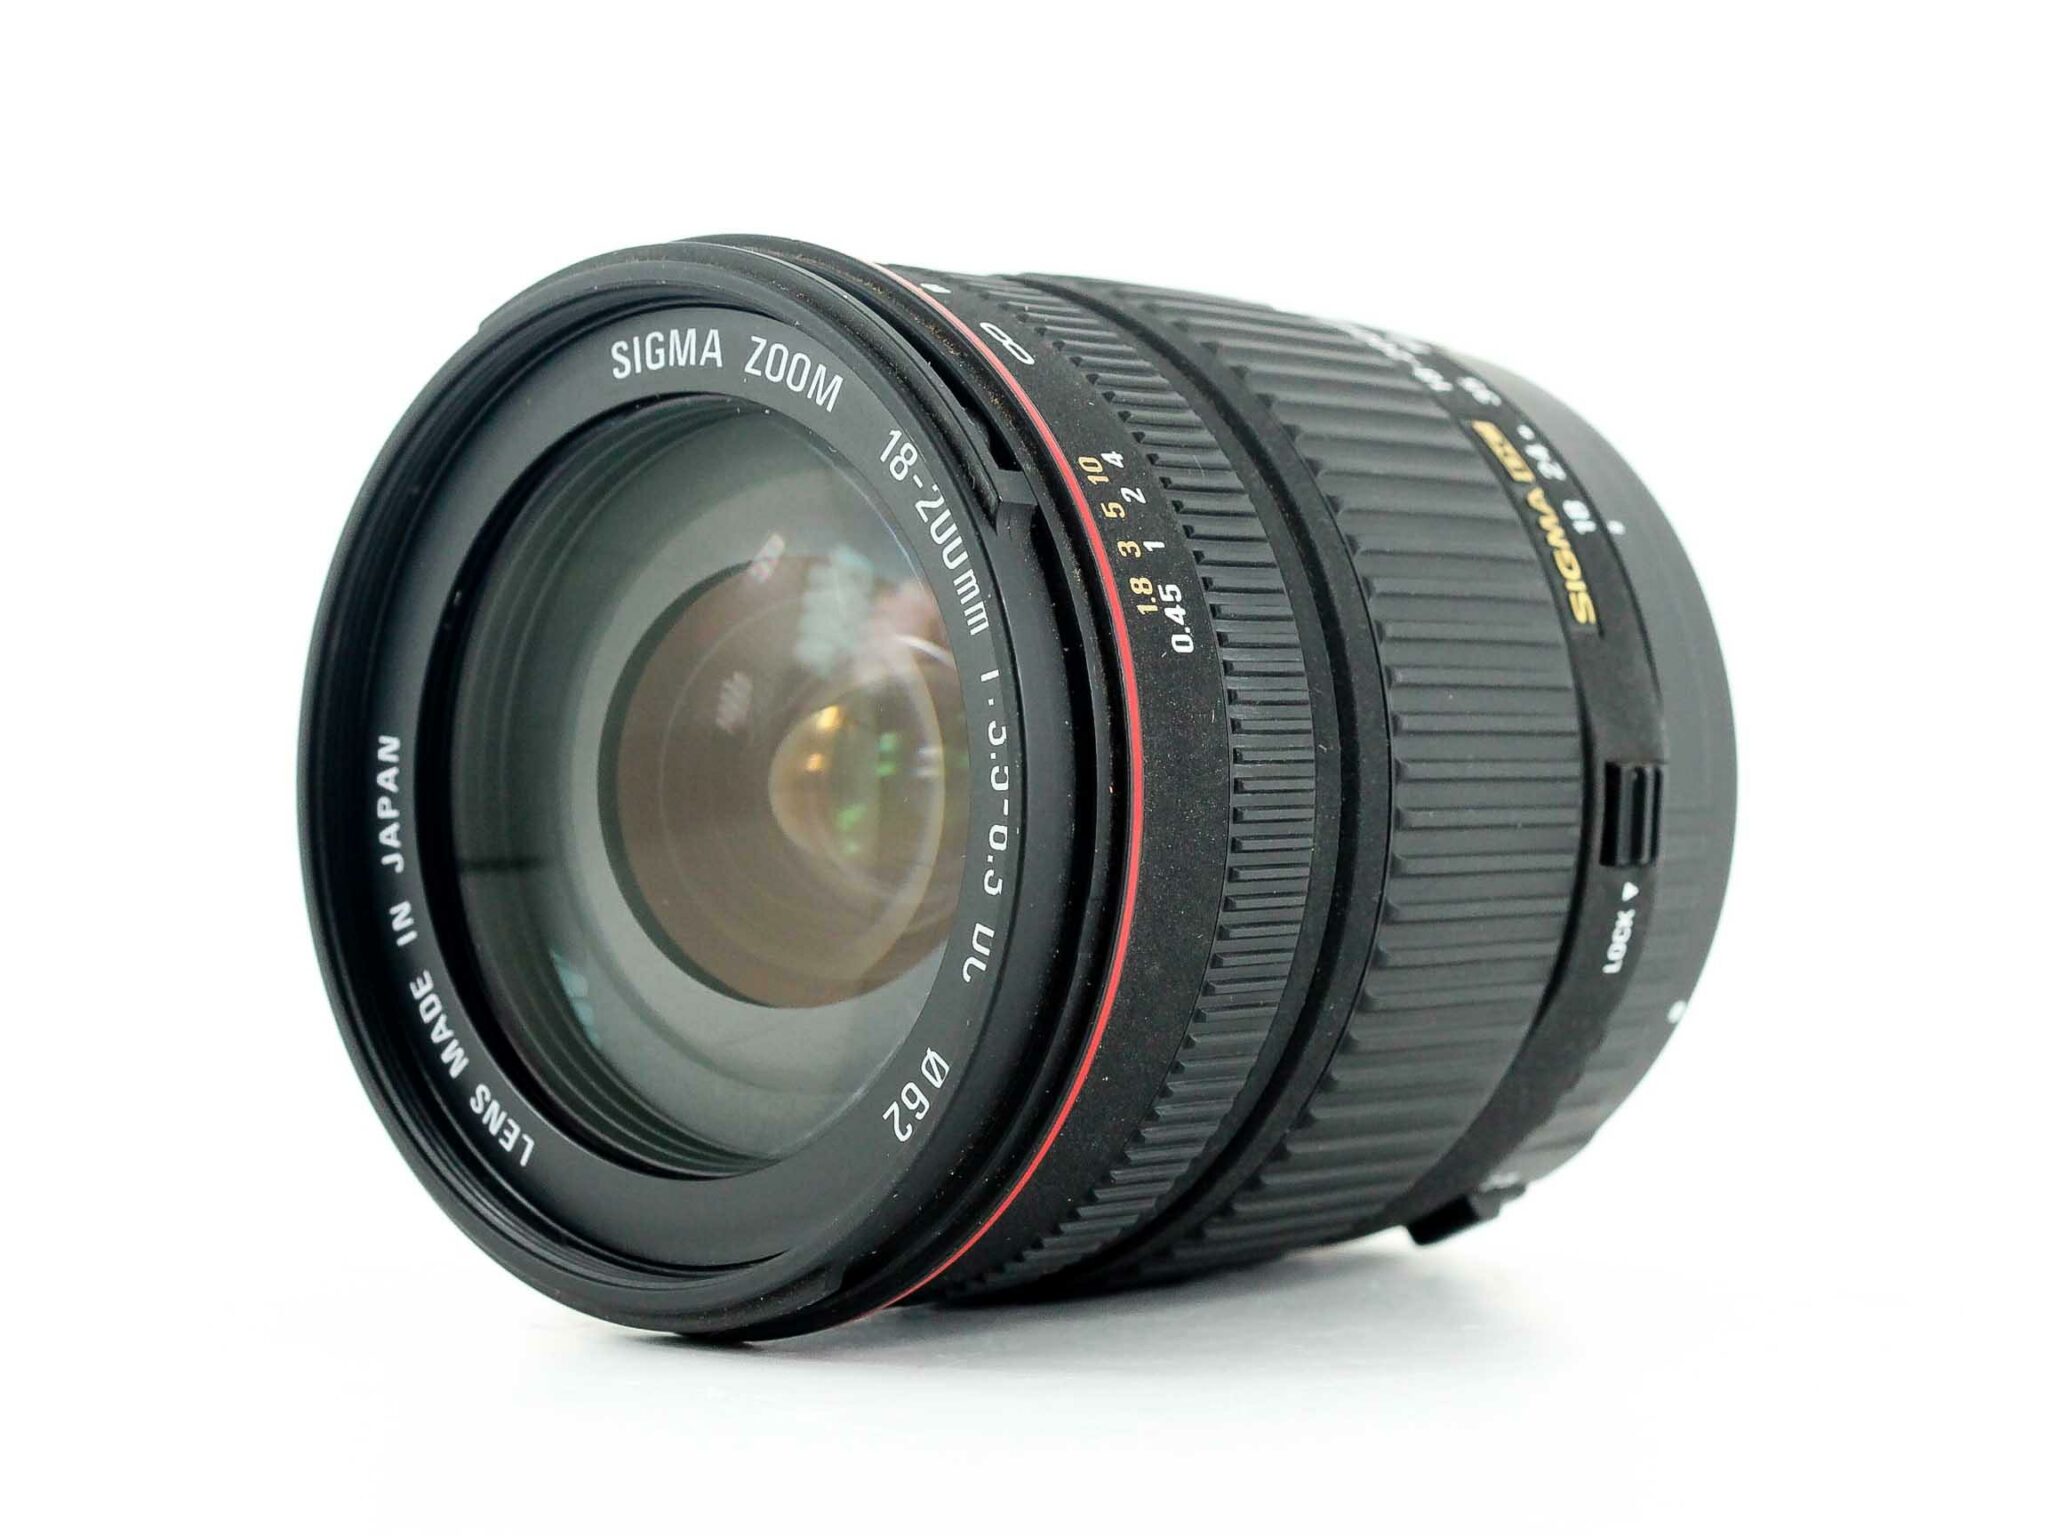 Sigma 18-200mm f/3.5-6.3 DC Canon EF-S Lens - Lenses and Cameras